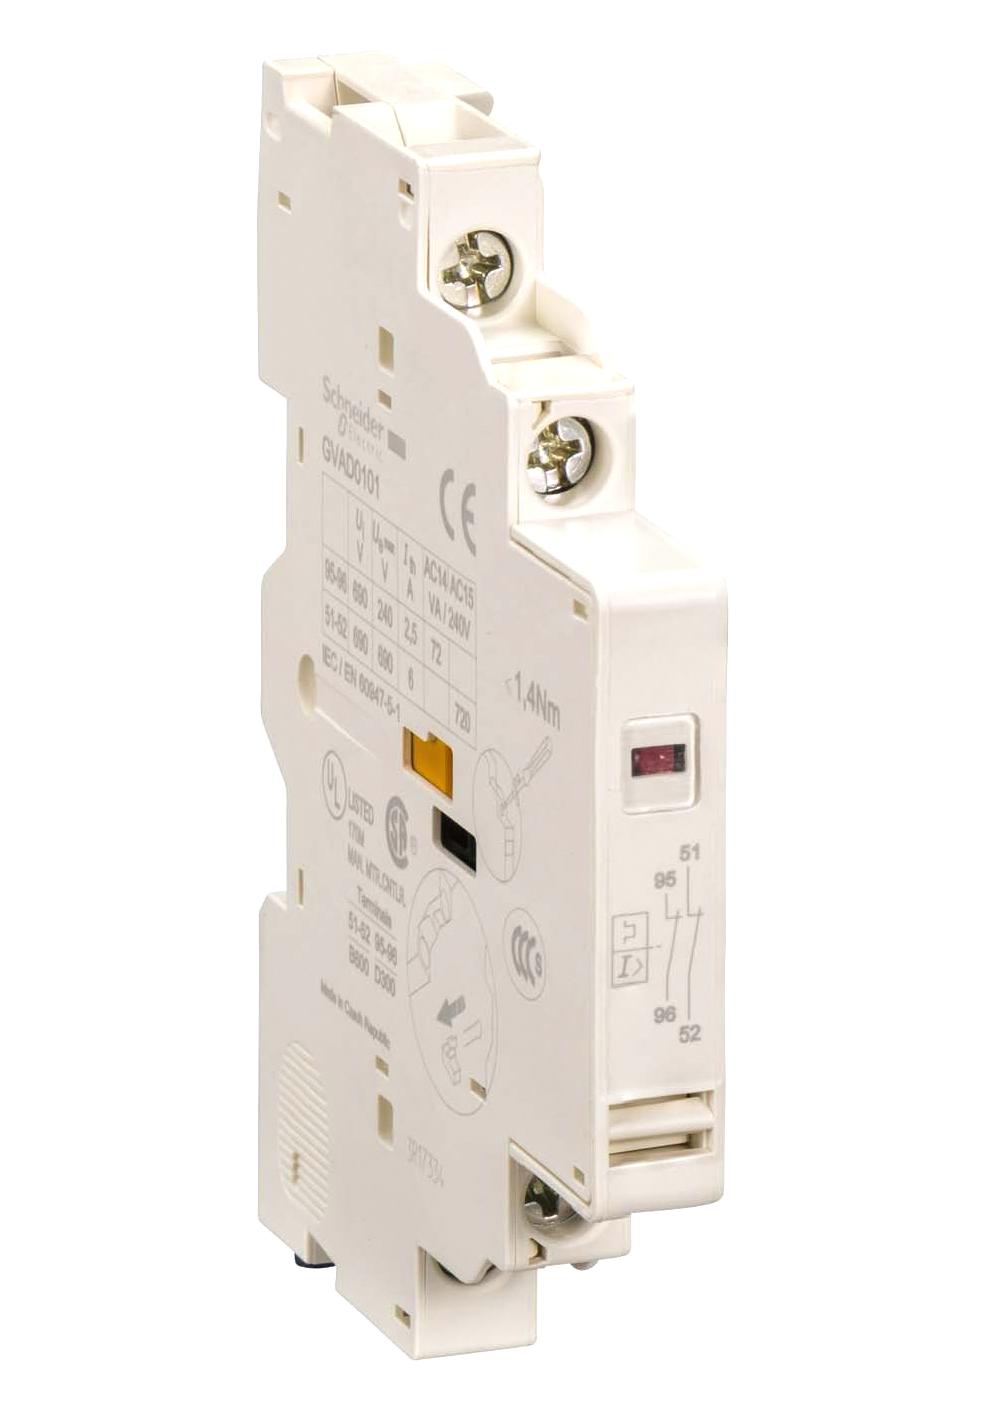 GVAD0101 AUX CONTACT BLOCK, STARTER/PROTECTOR SCHNEIDER ELECTRIC